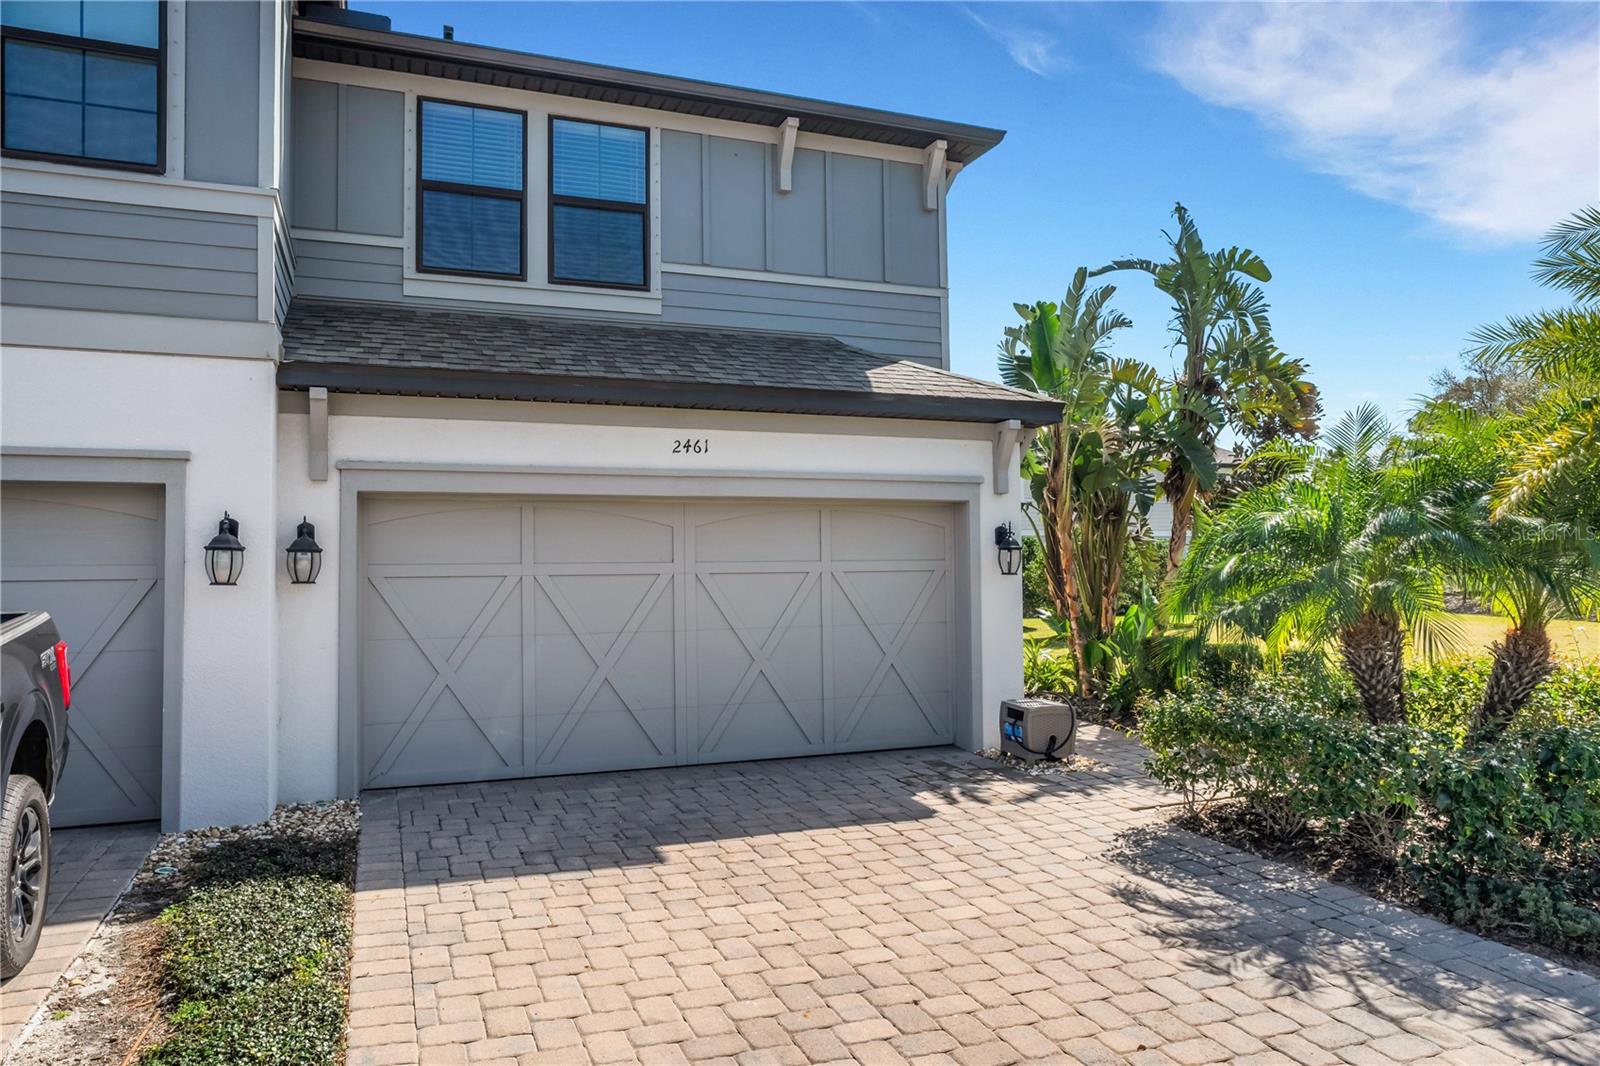 View CLEARWATER, FL 33764 townhome